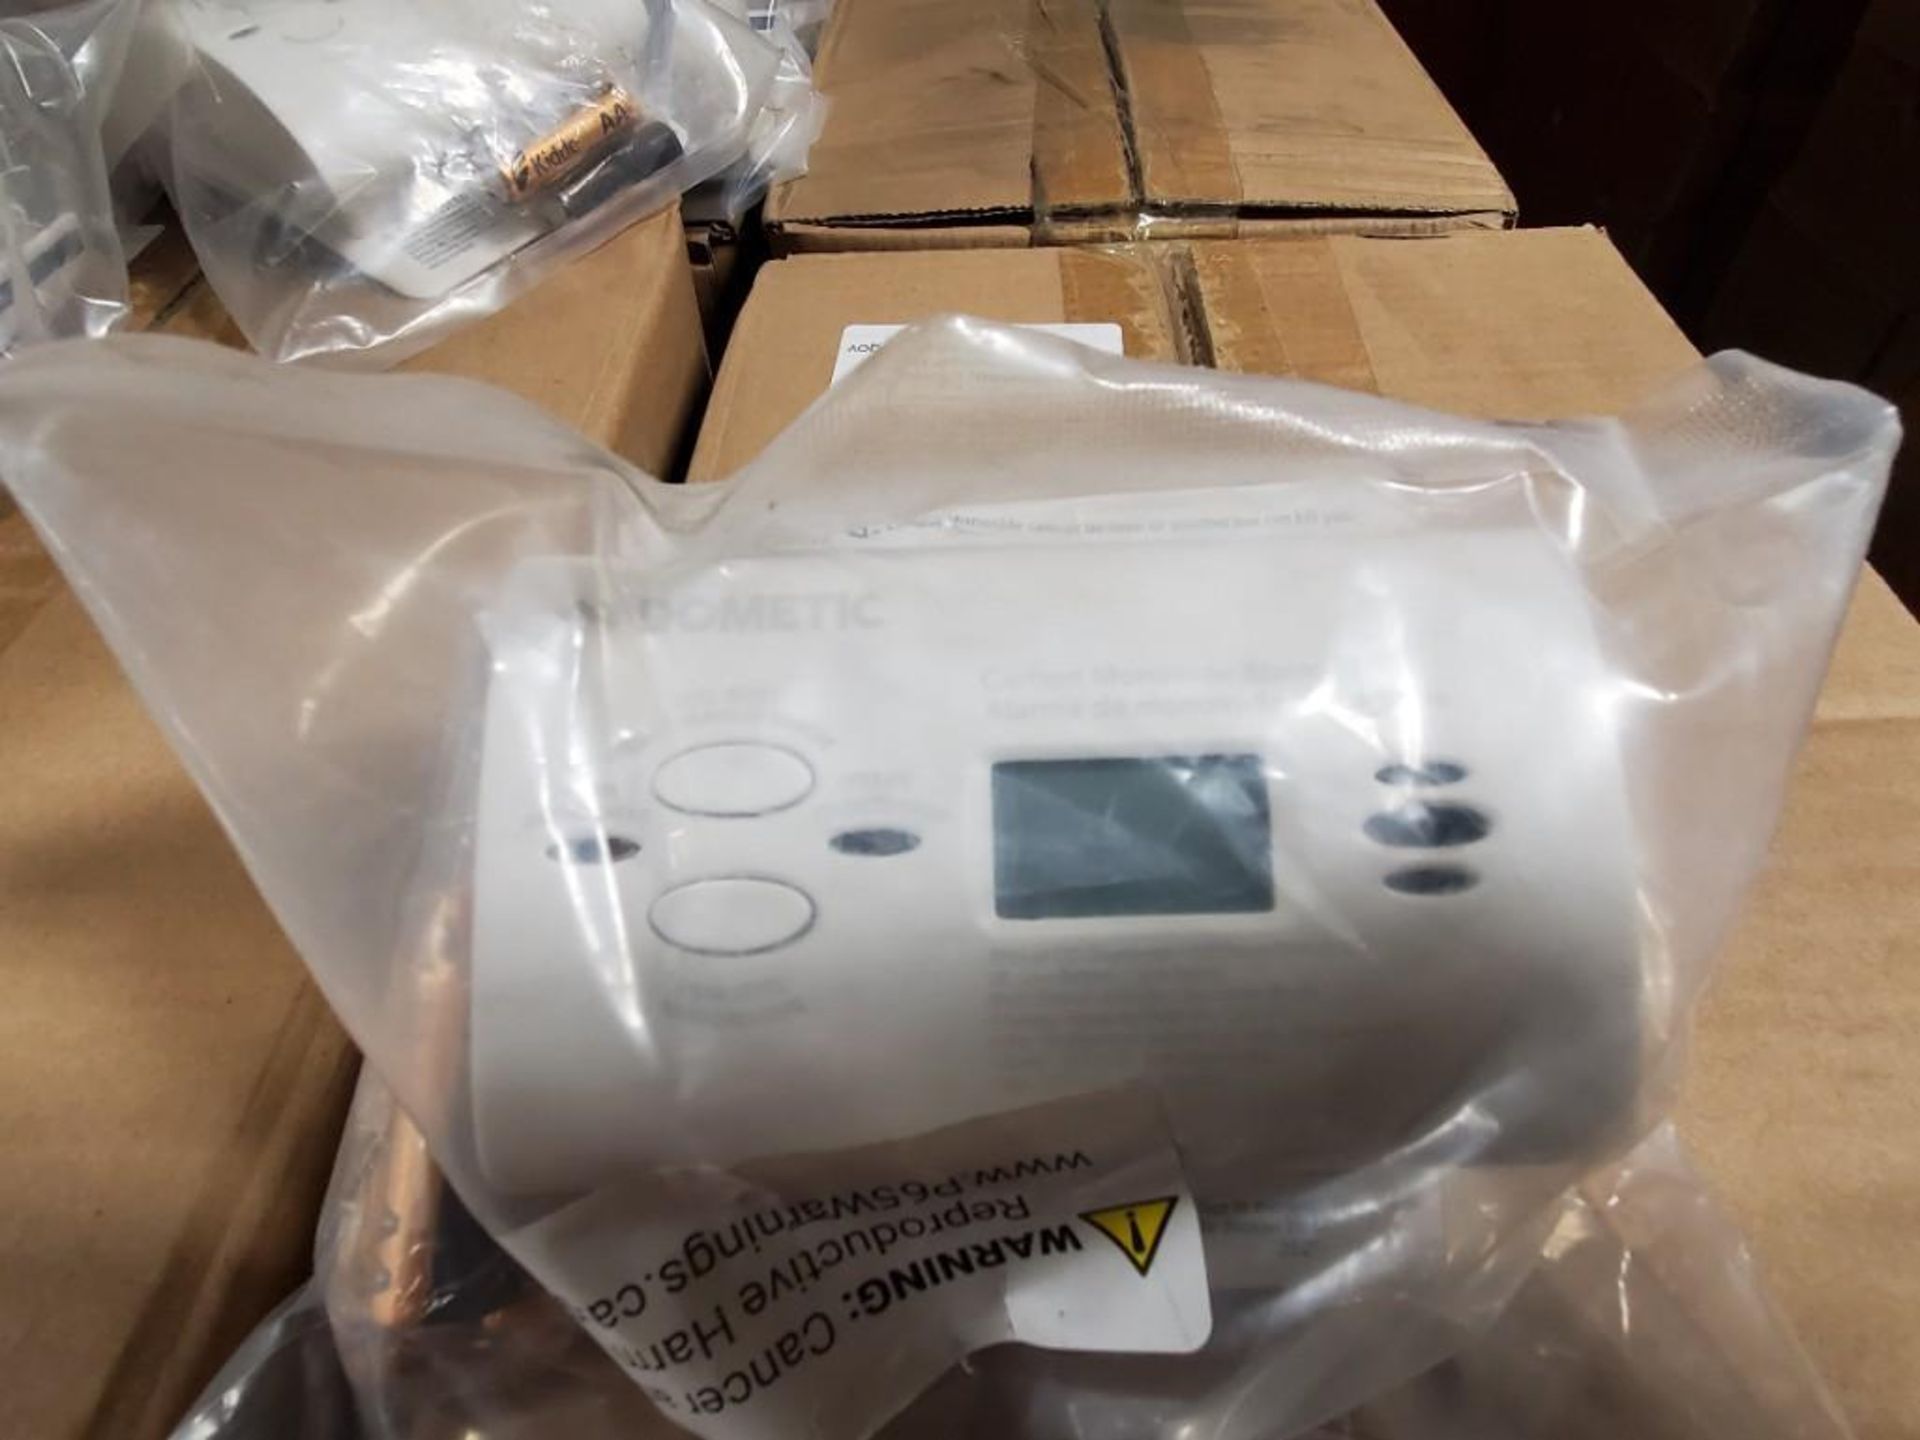 Qty 72 - Dometic Carbon Monoxide detector with LCD. Model CO-900-0140-LPM. New in bulk box. - Image 2 of 3